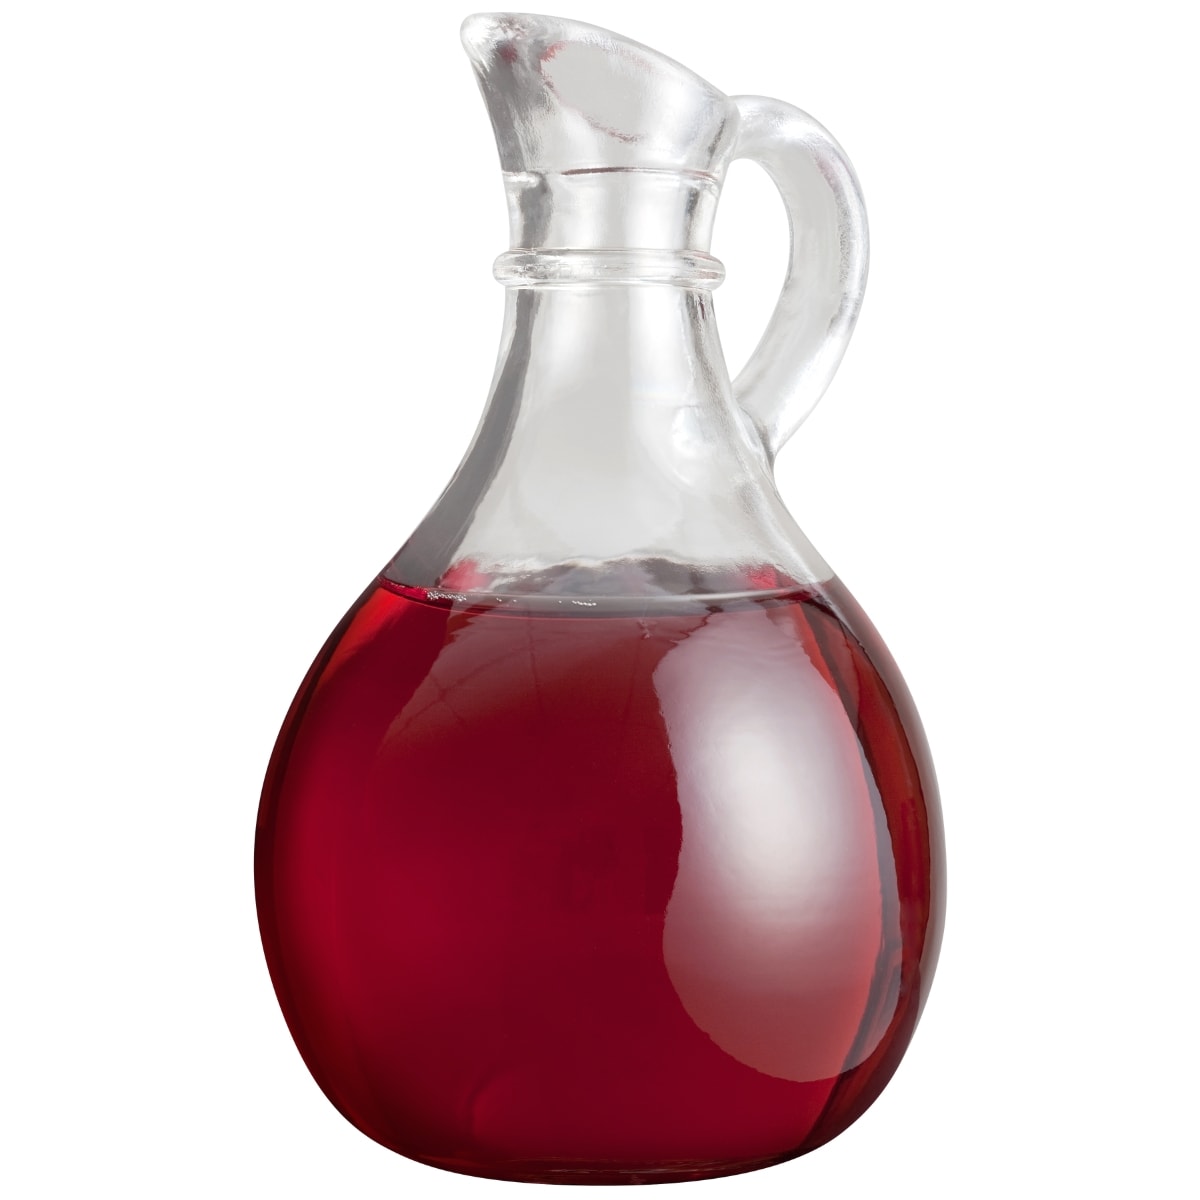 A clear glass container filled with red wine vinegar.